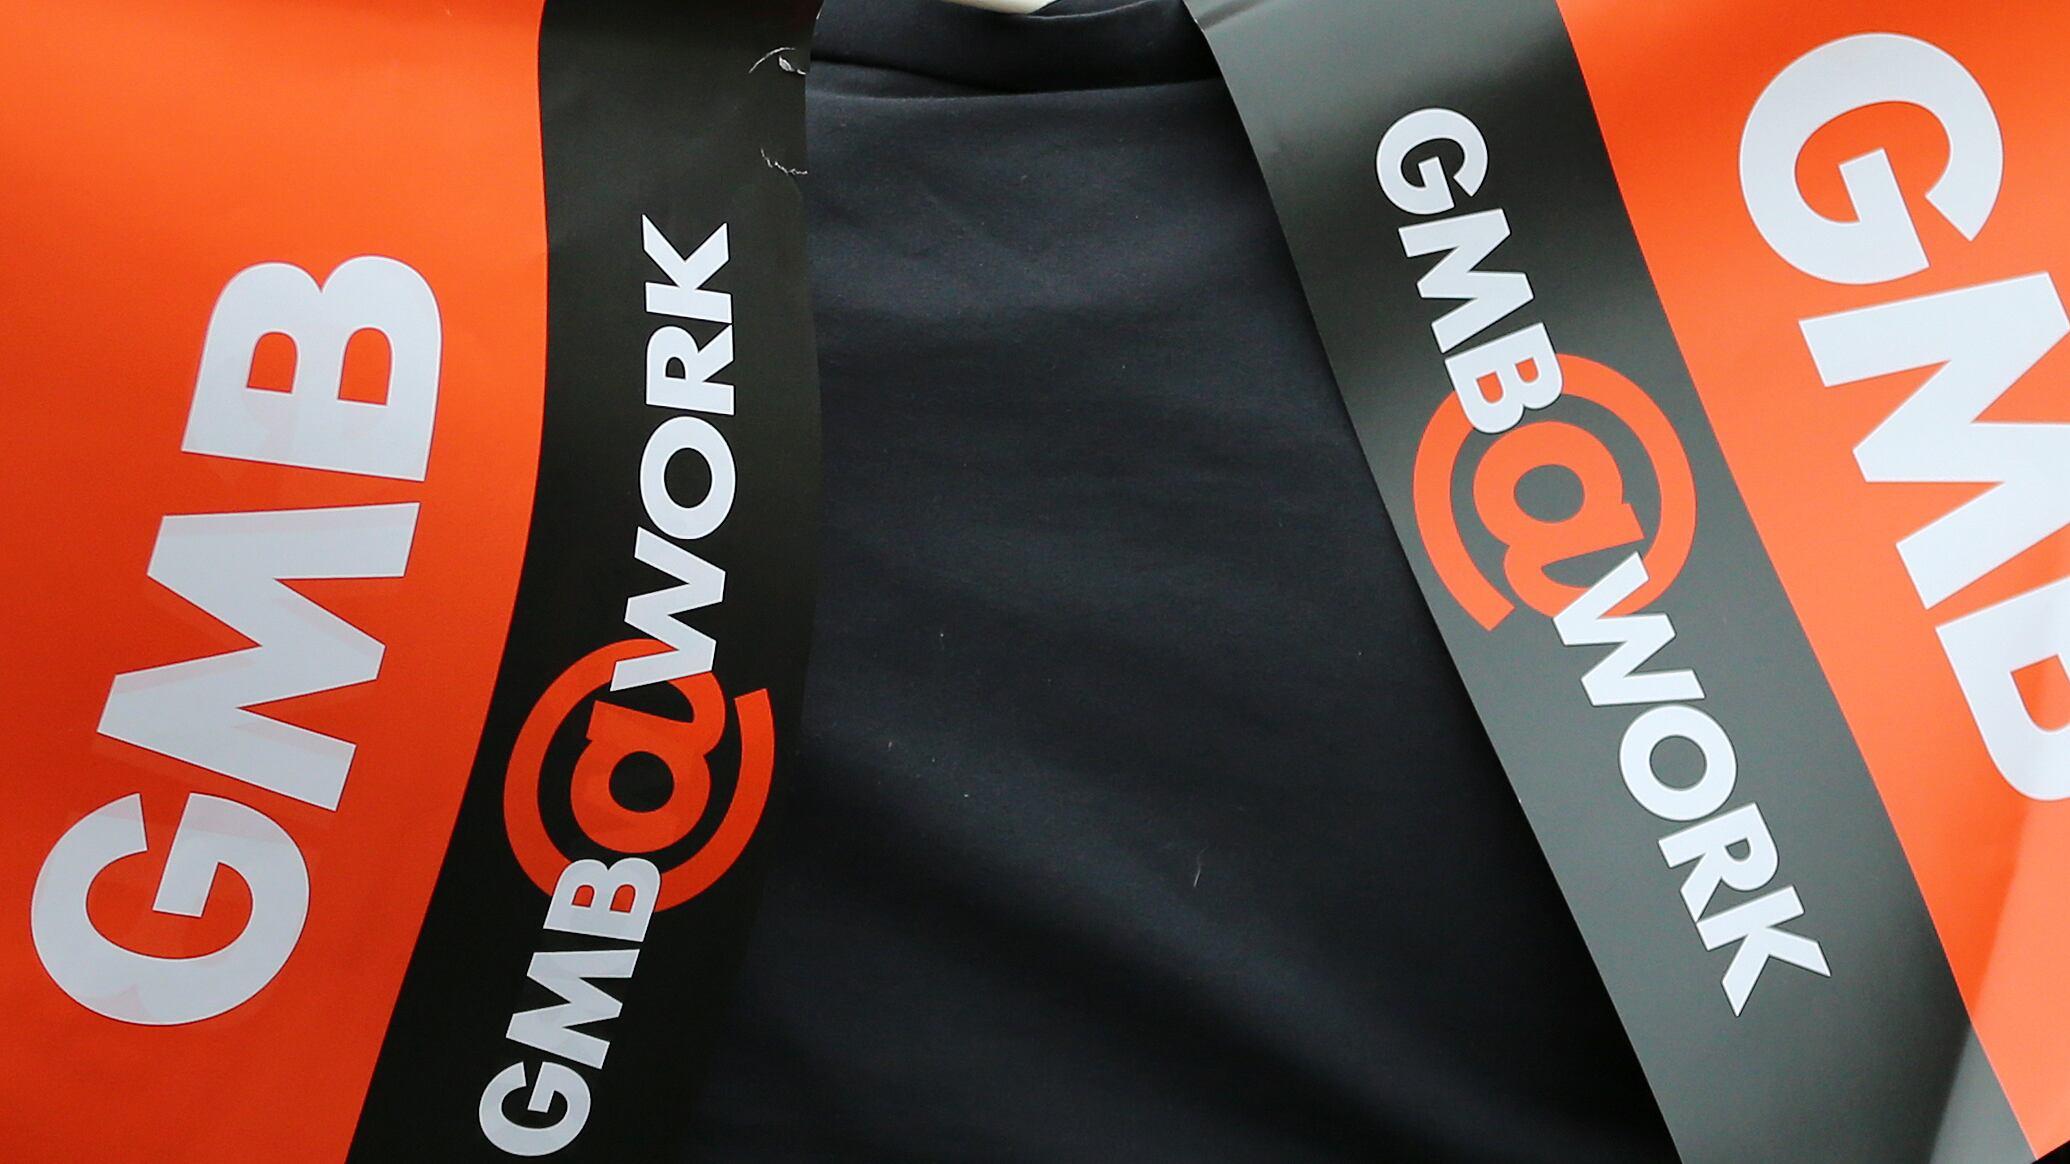 Members of the GMB union are voting on potential strike action